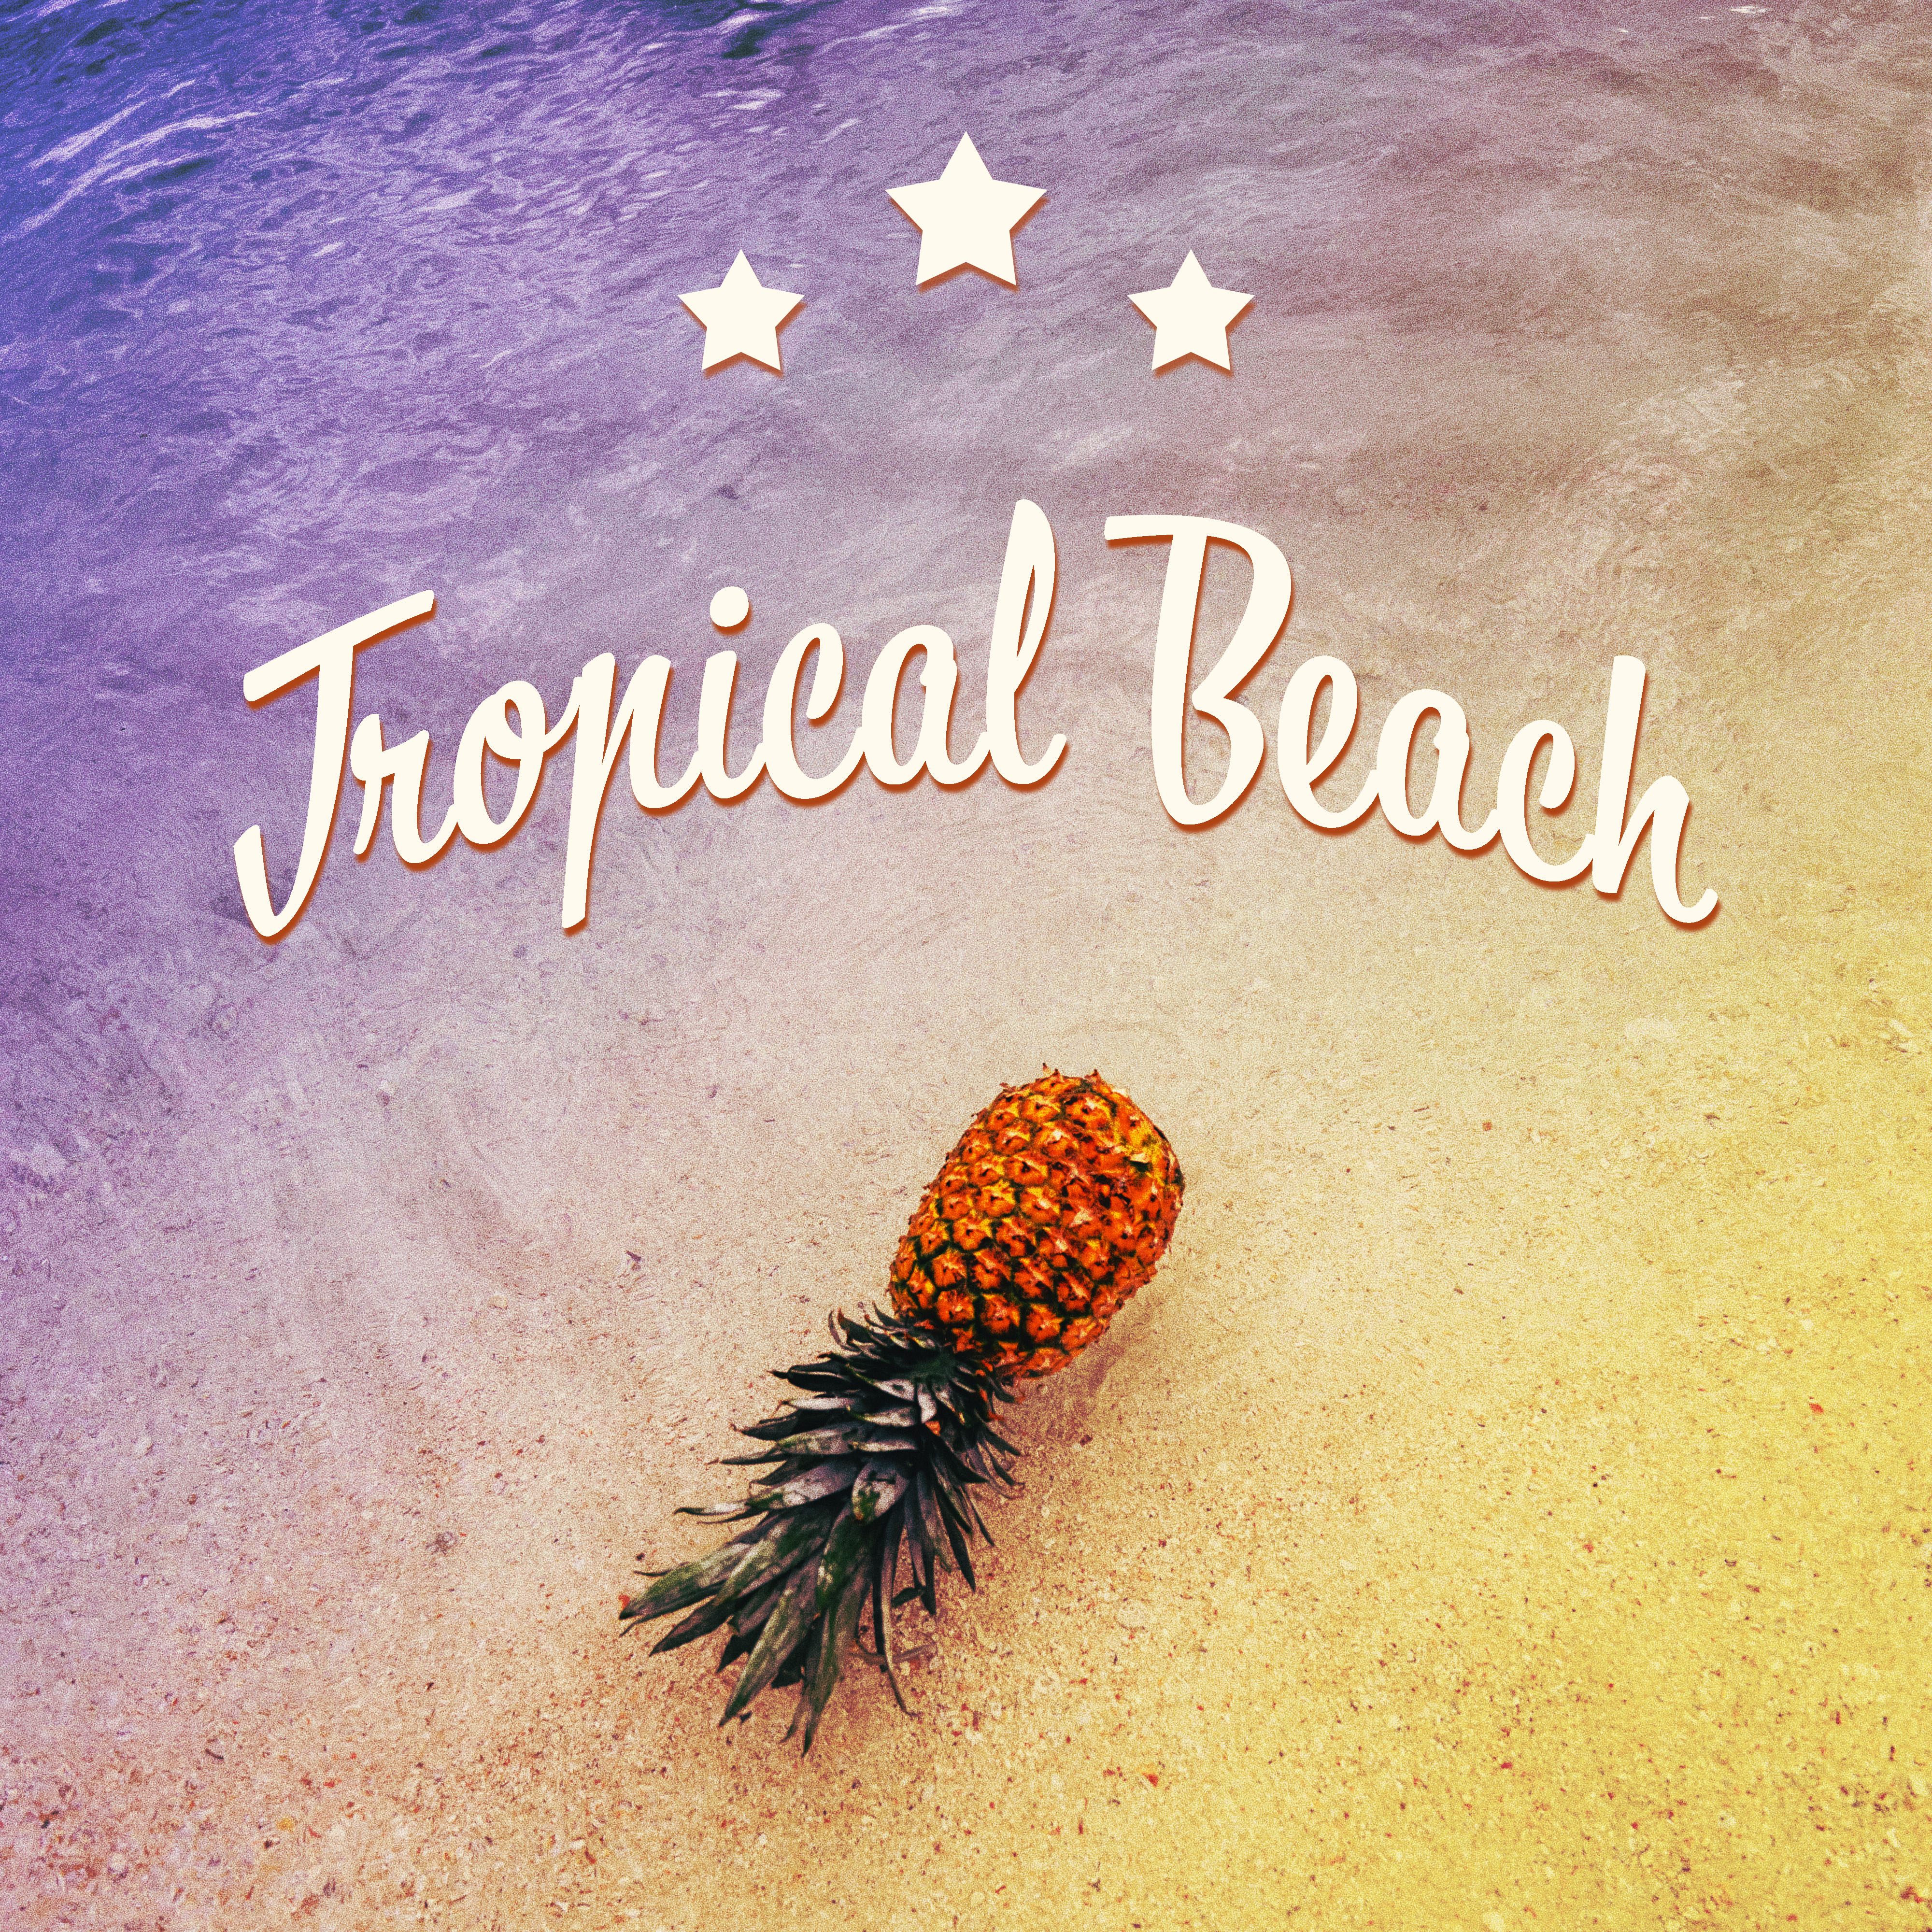 Tropical Beach – Holiday Chill Out Music, Relax, Summer Lounge, Beach Chill, Tropical Sounds, Pure Rest